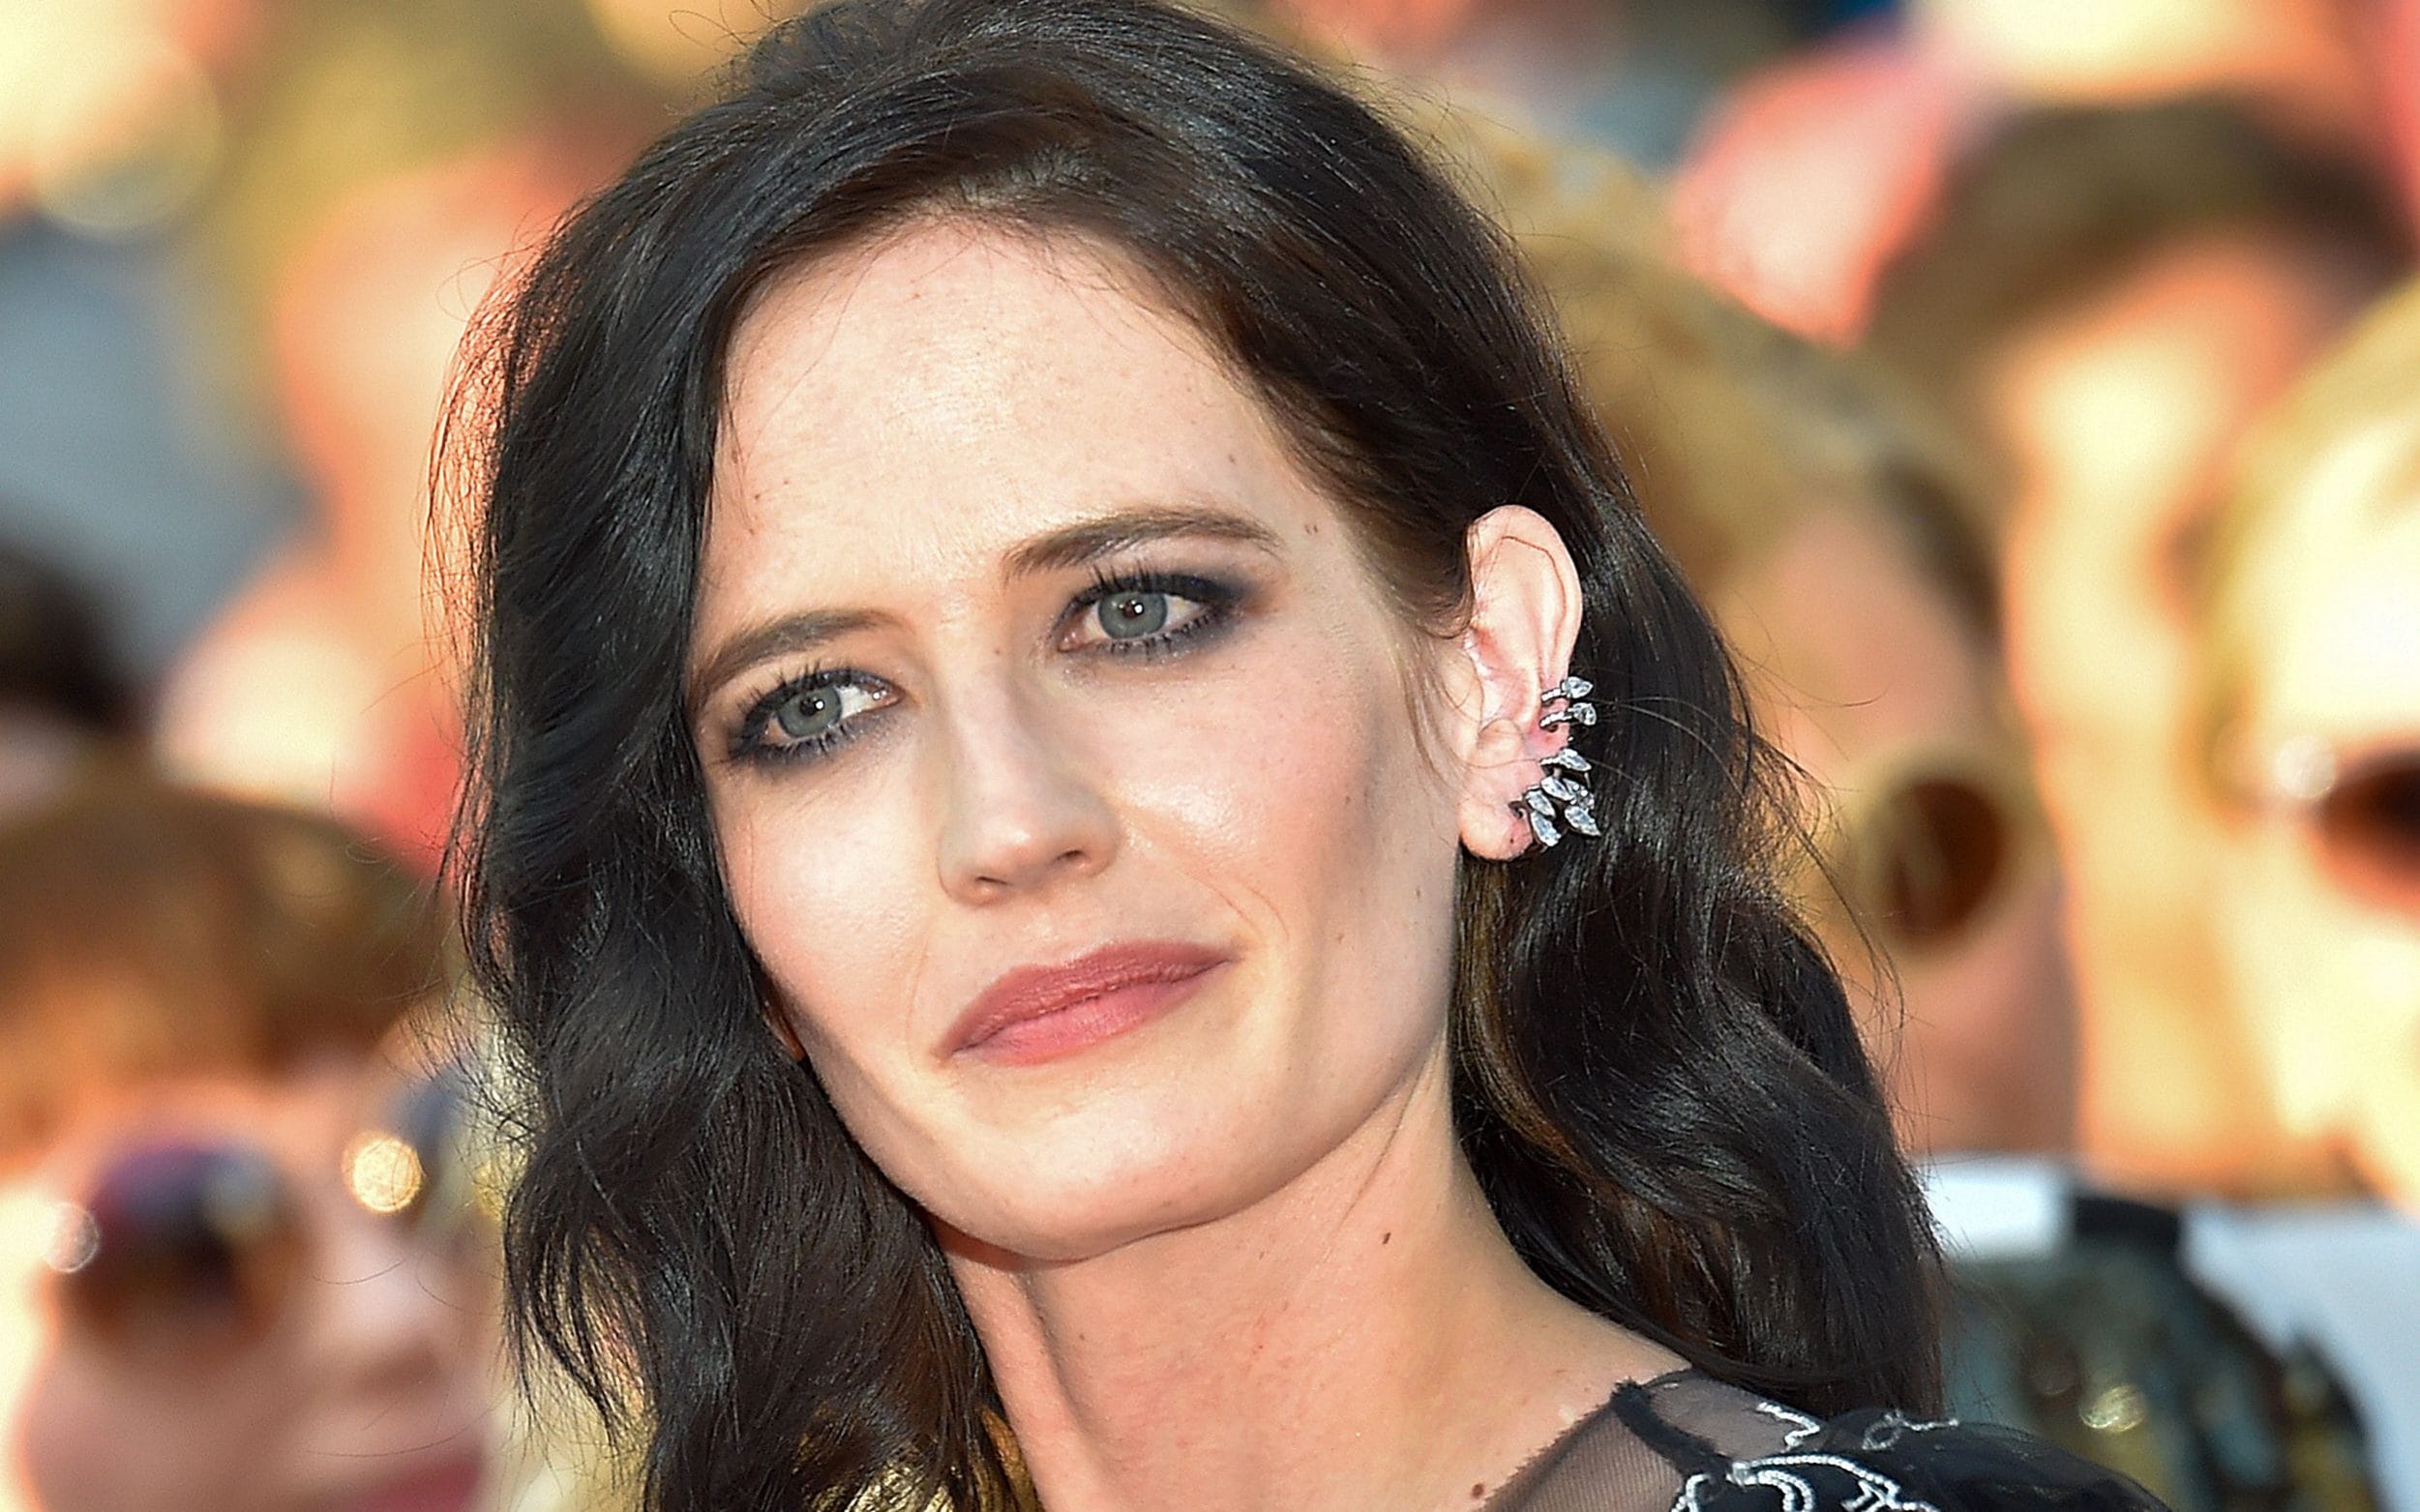 Eva Green Wiki, Bio, Age, Net Worth, and Other Facts